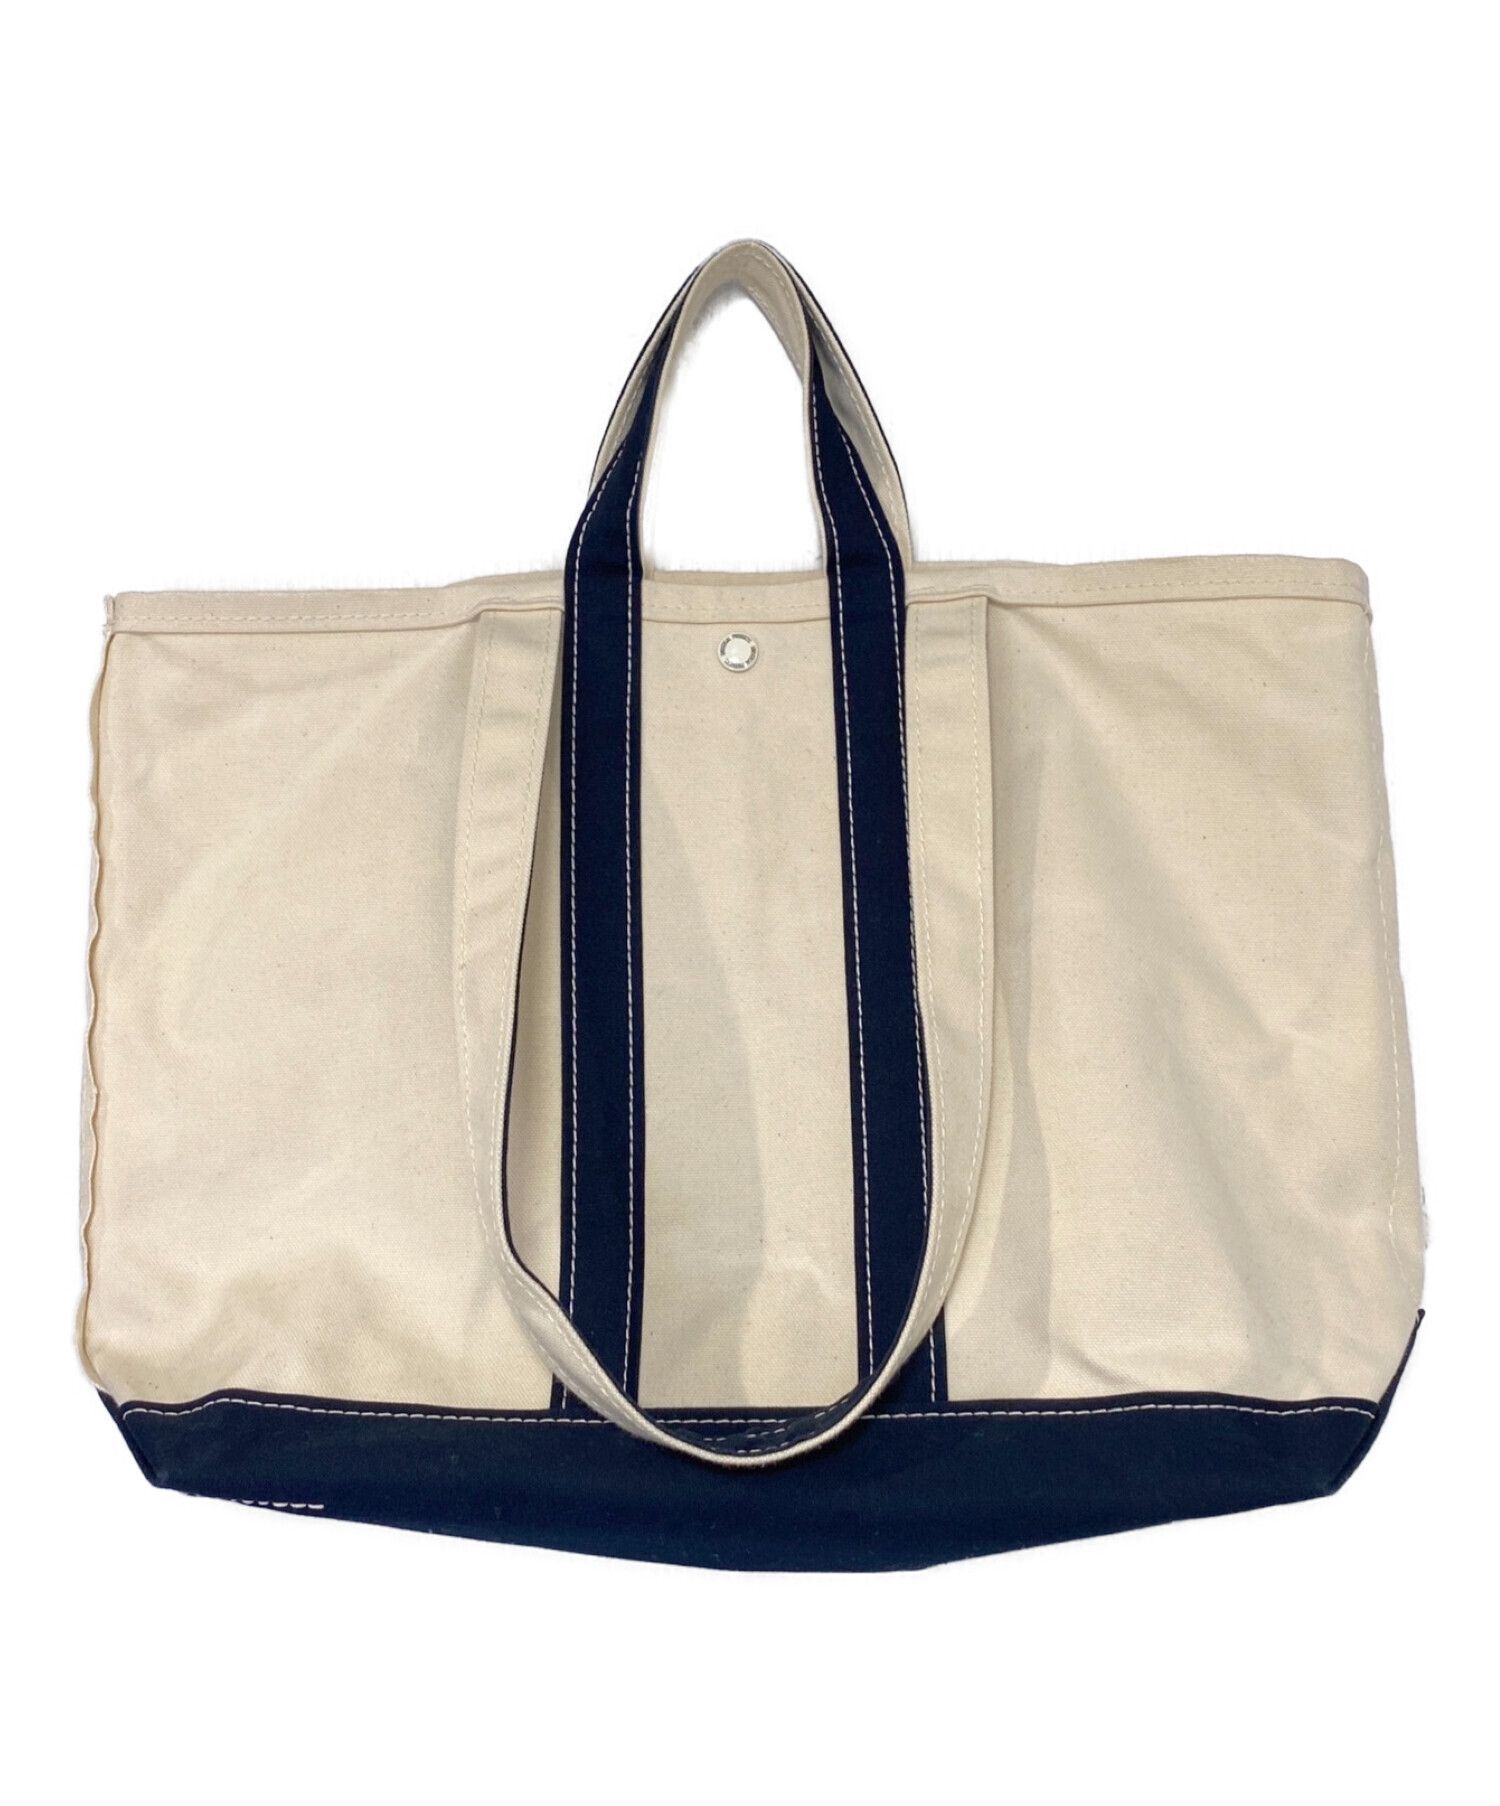 UNIVERSAL PRODUCTS. N"TOTE BAG"トートバッグ